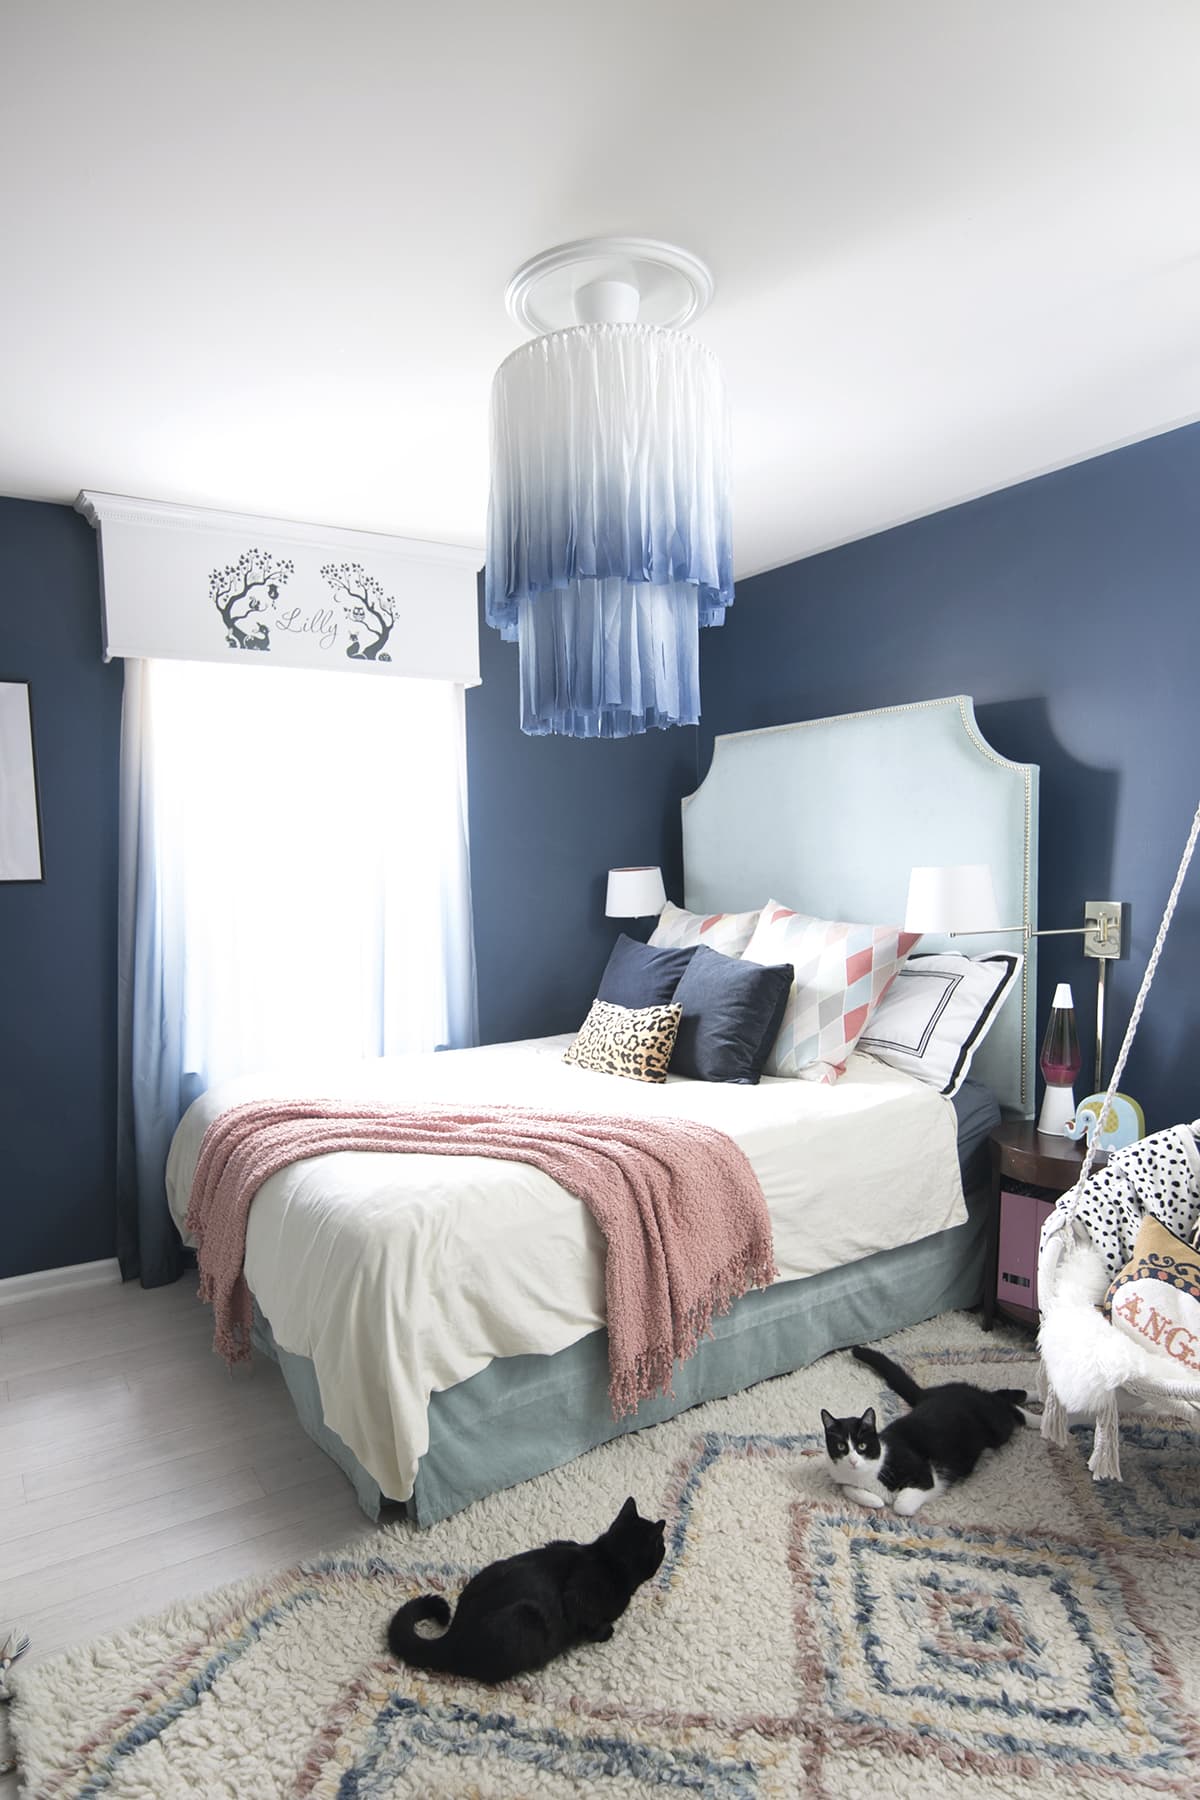 macrame white and blue chandelier in bedroom